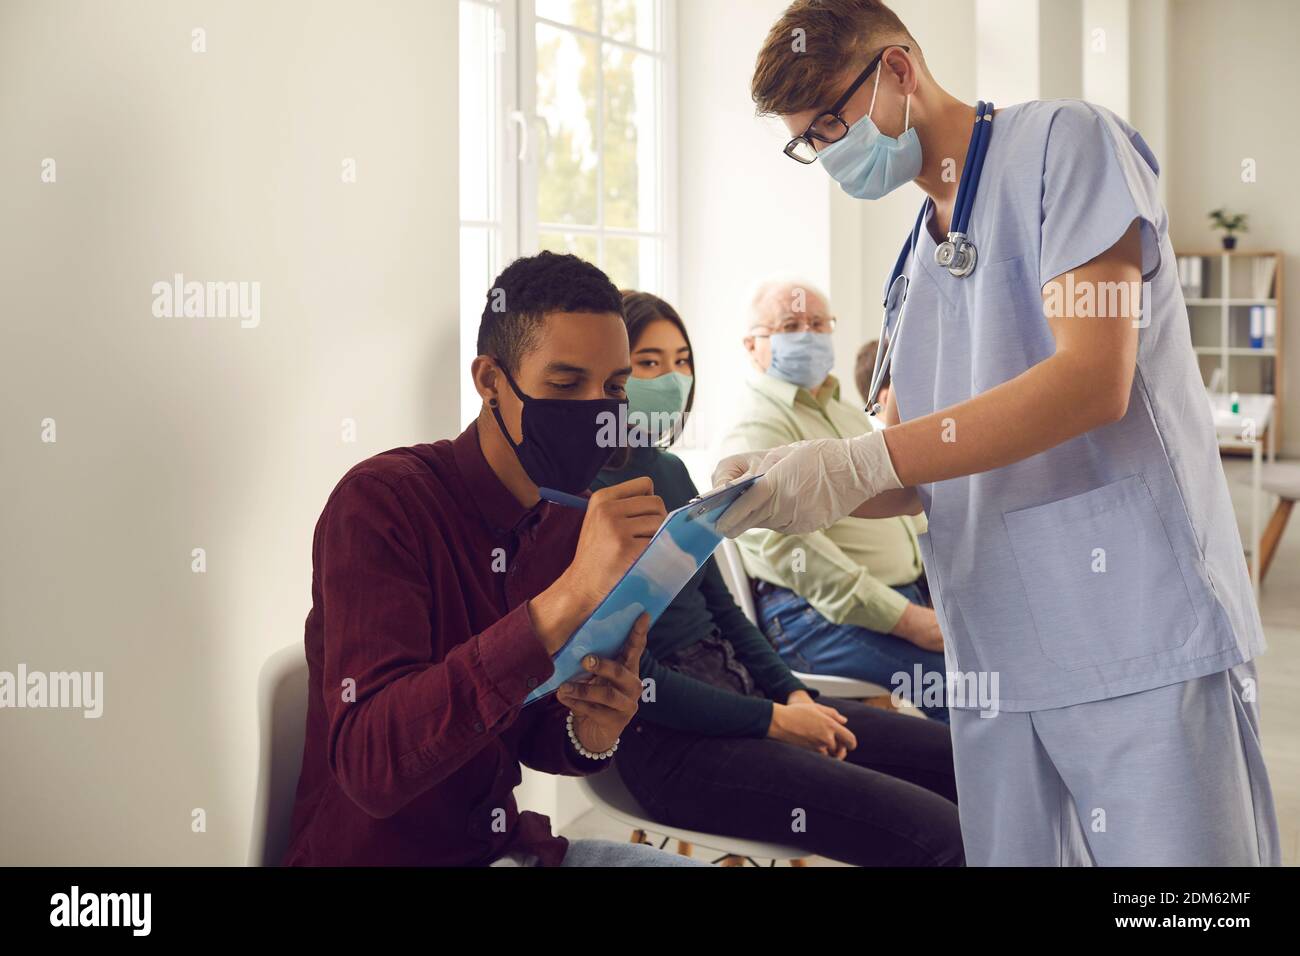 African-American man signs papers that doctor gives him before getting vaccine at the hospital Stock Photo